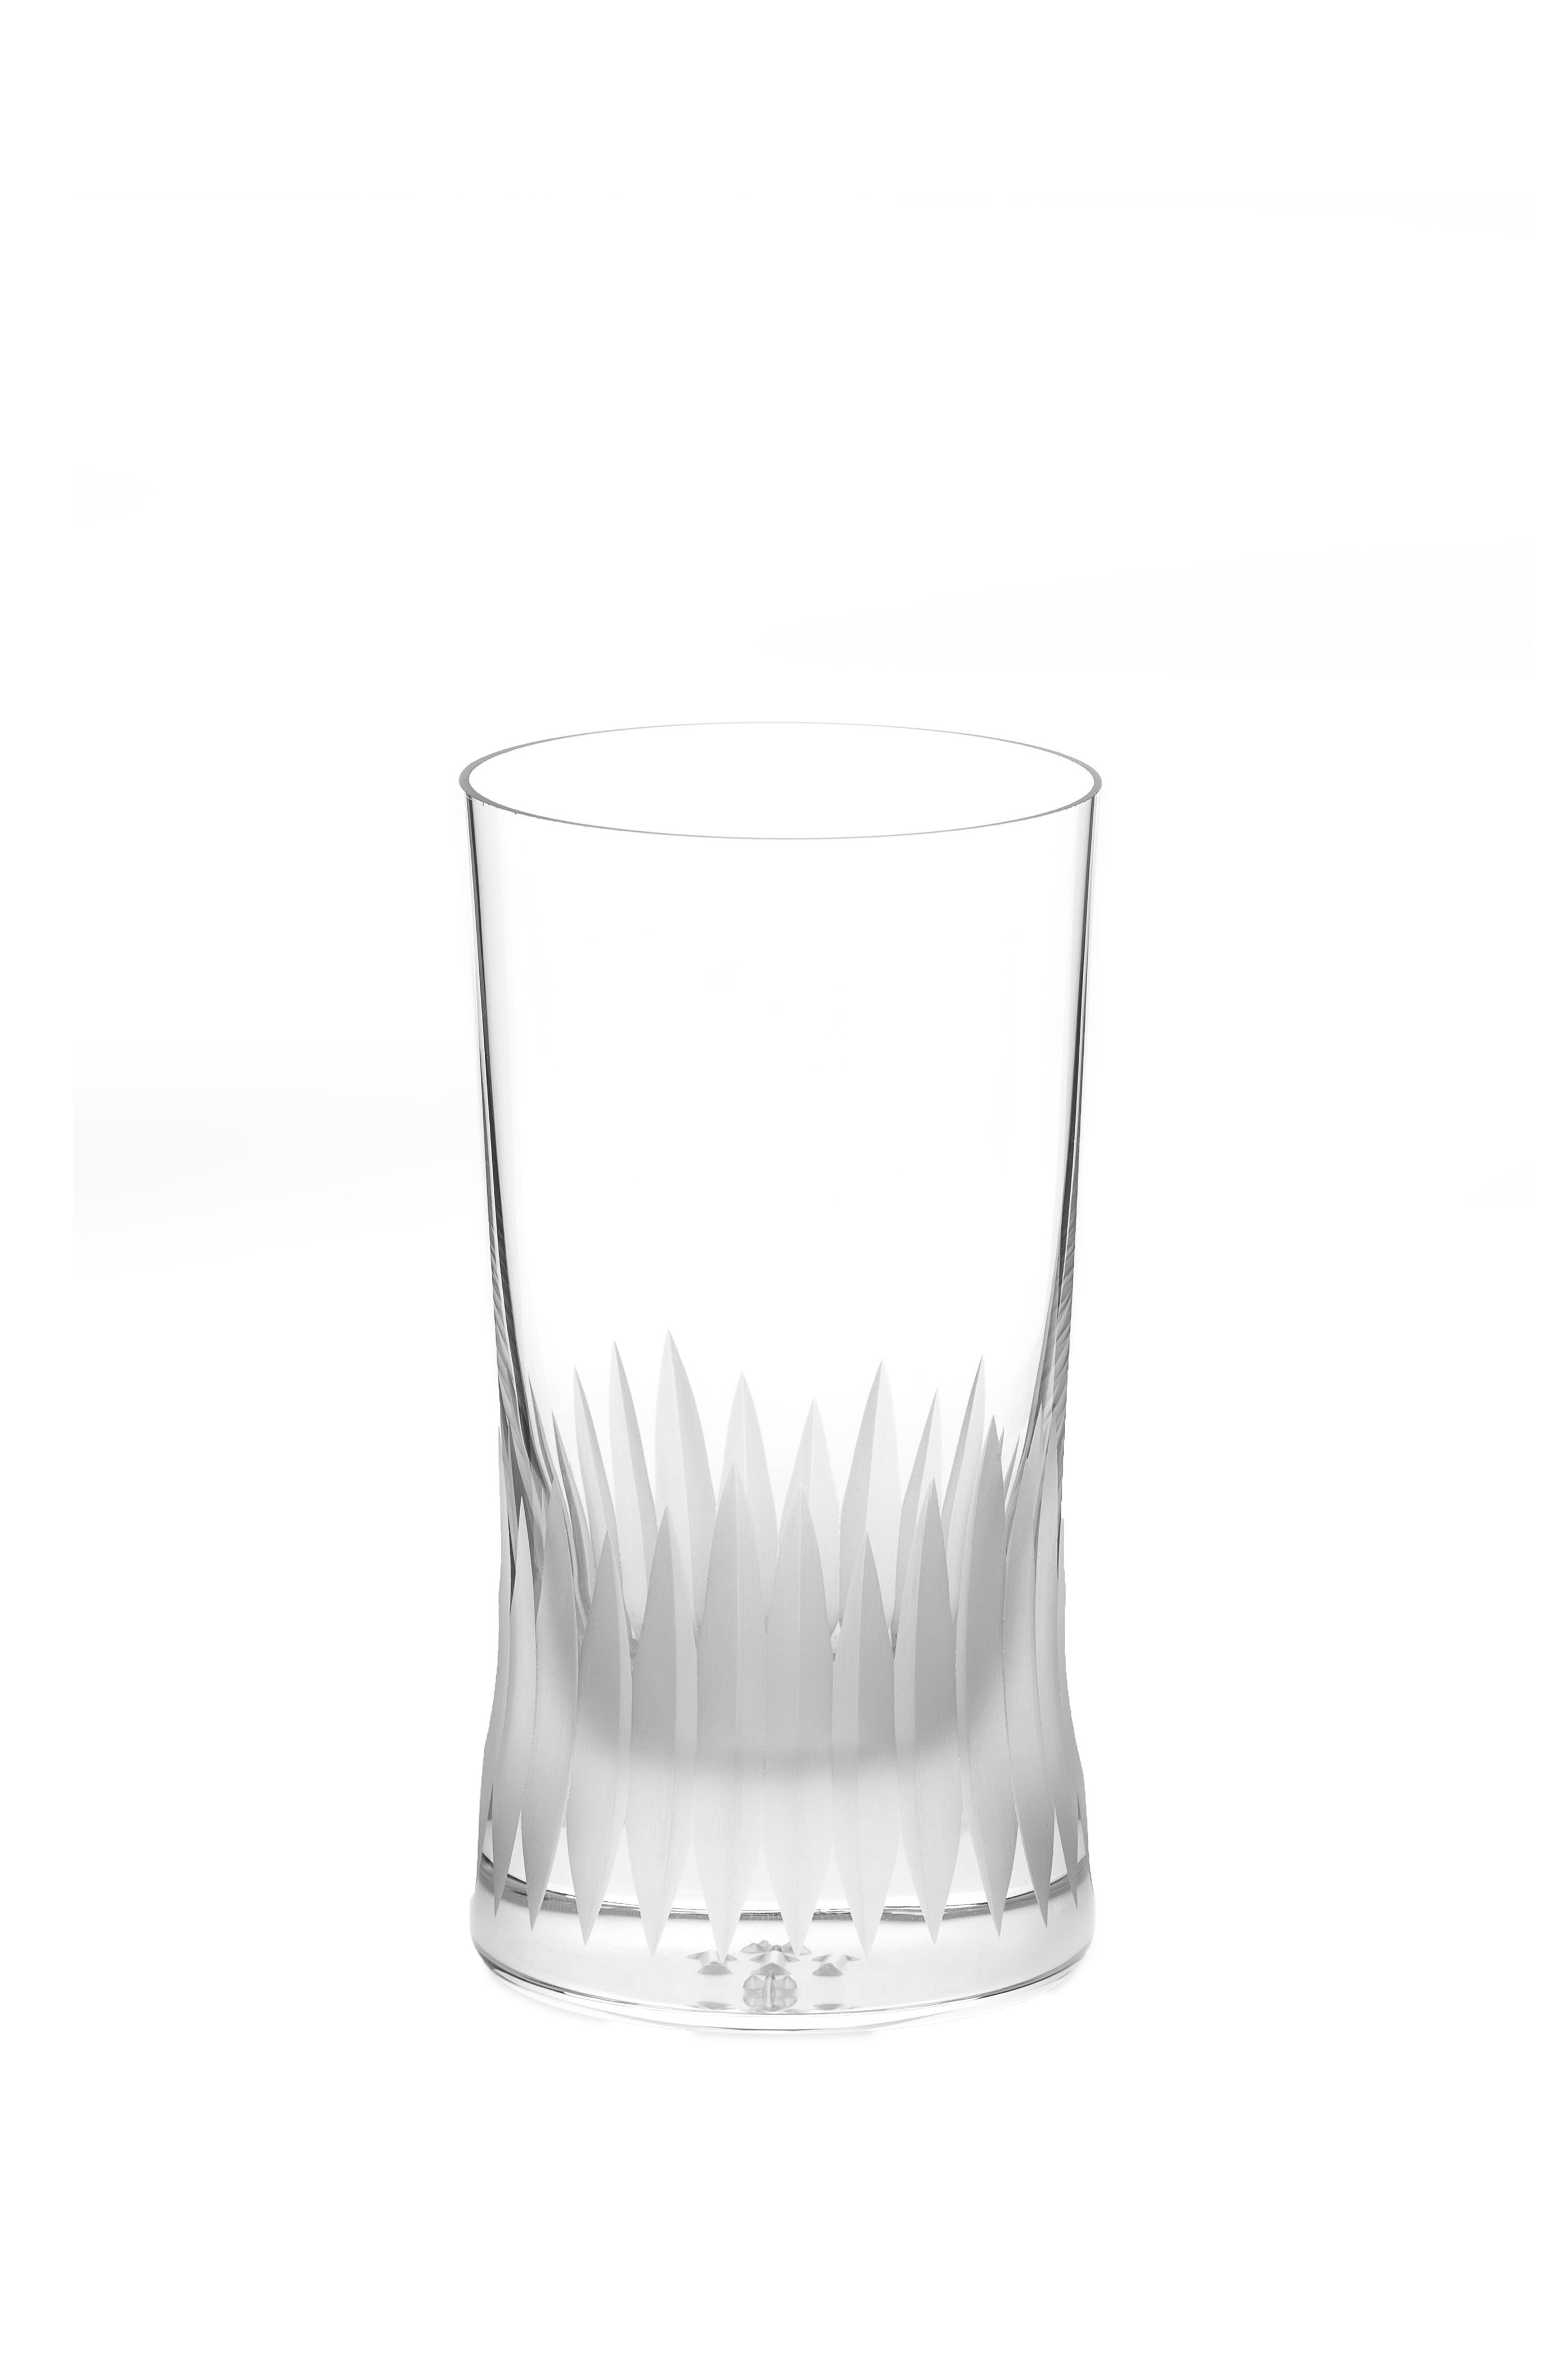 Hand-Crafted Martino Gamper Handmade Irish Crystal Large Tumbler Glass Cuttings Series CUT I For Sale